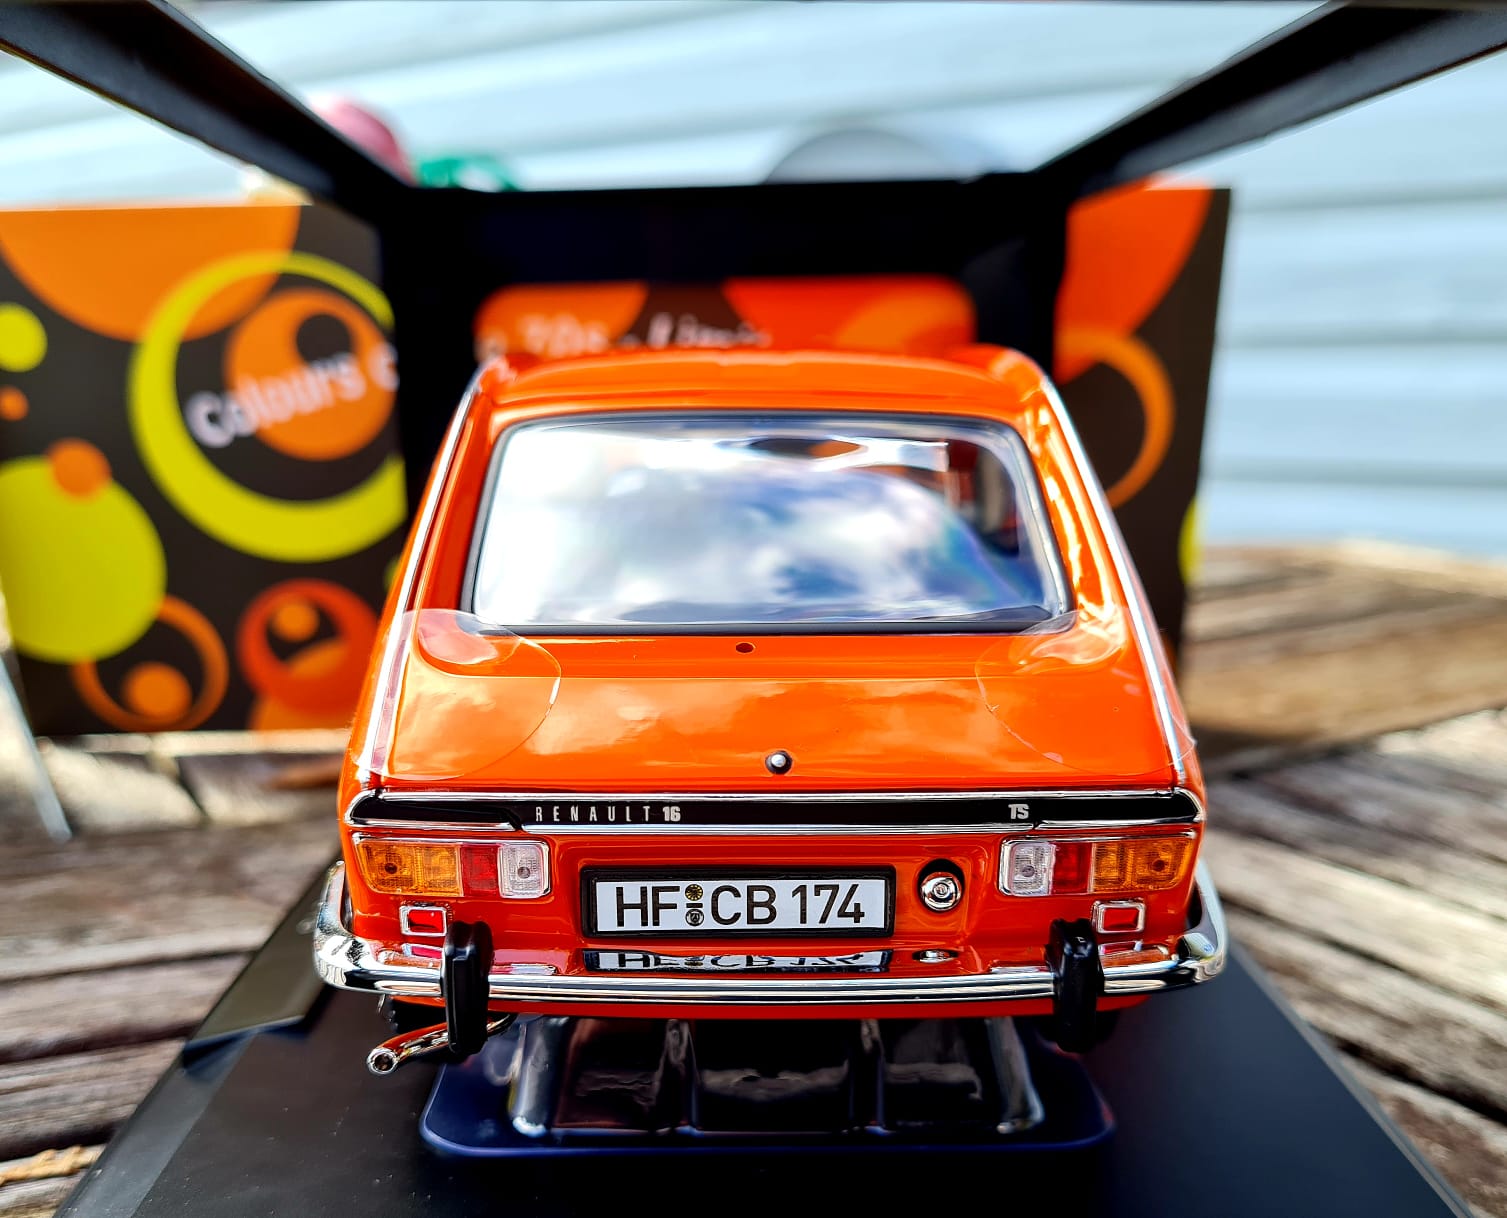 Renault 16 2. Series 1971 orange 1:18 Norev Colours of the 70s